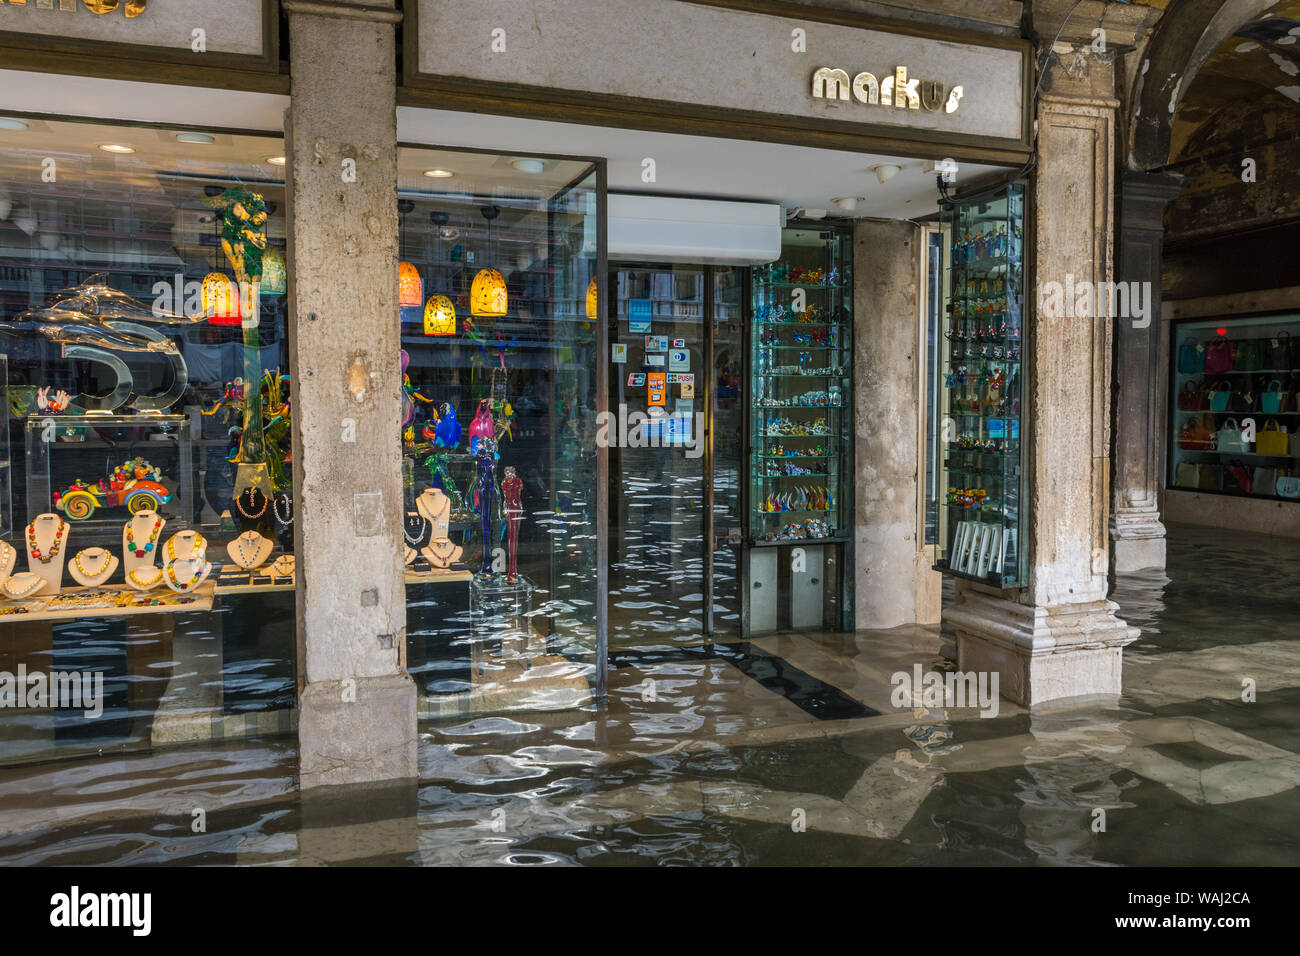 Flooded shop front at the Procuratie Vecchie arcades during an Acqua alta (high water) event, Saint Mark's Square, Venice, Italy Stock Photo